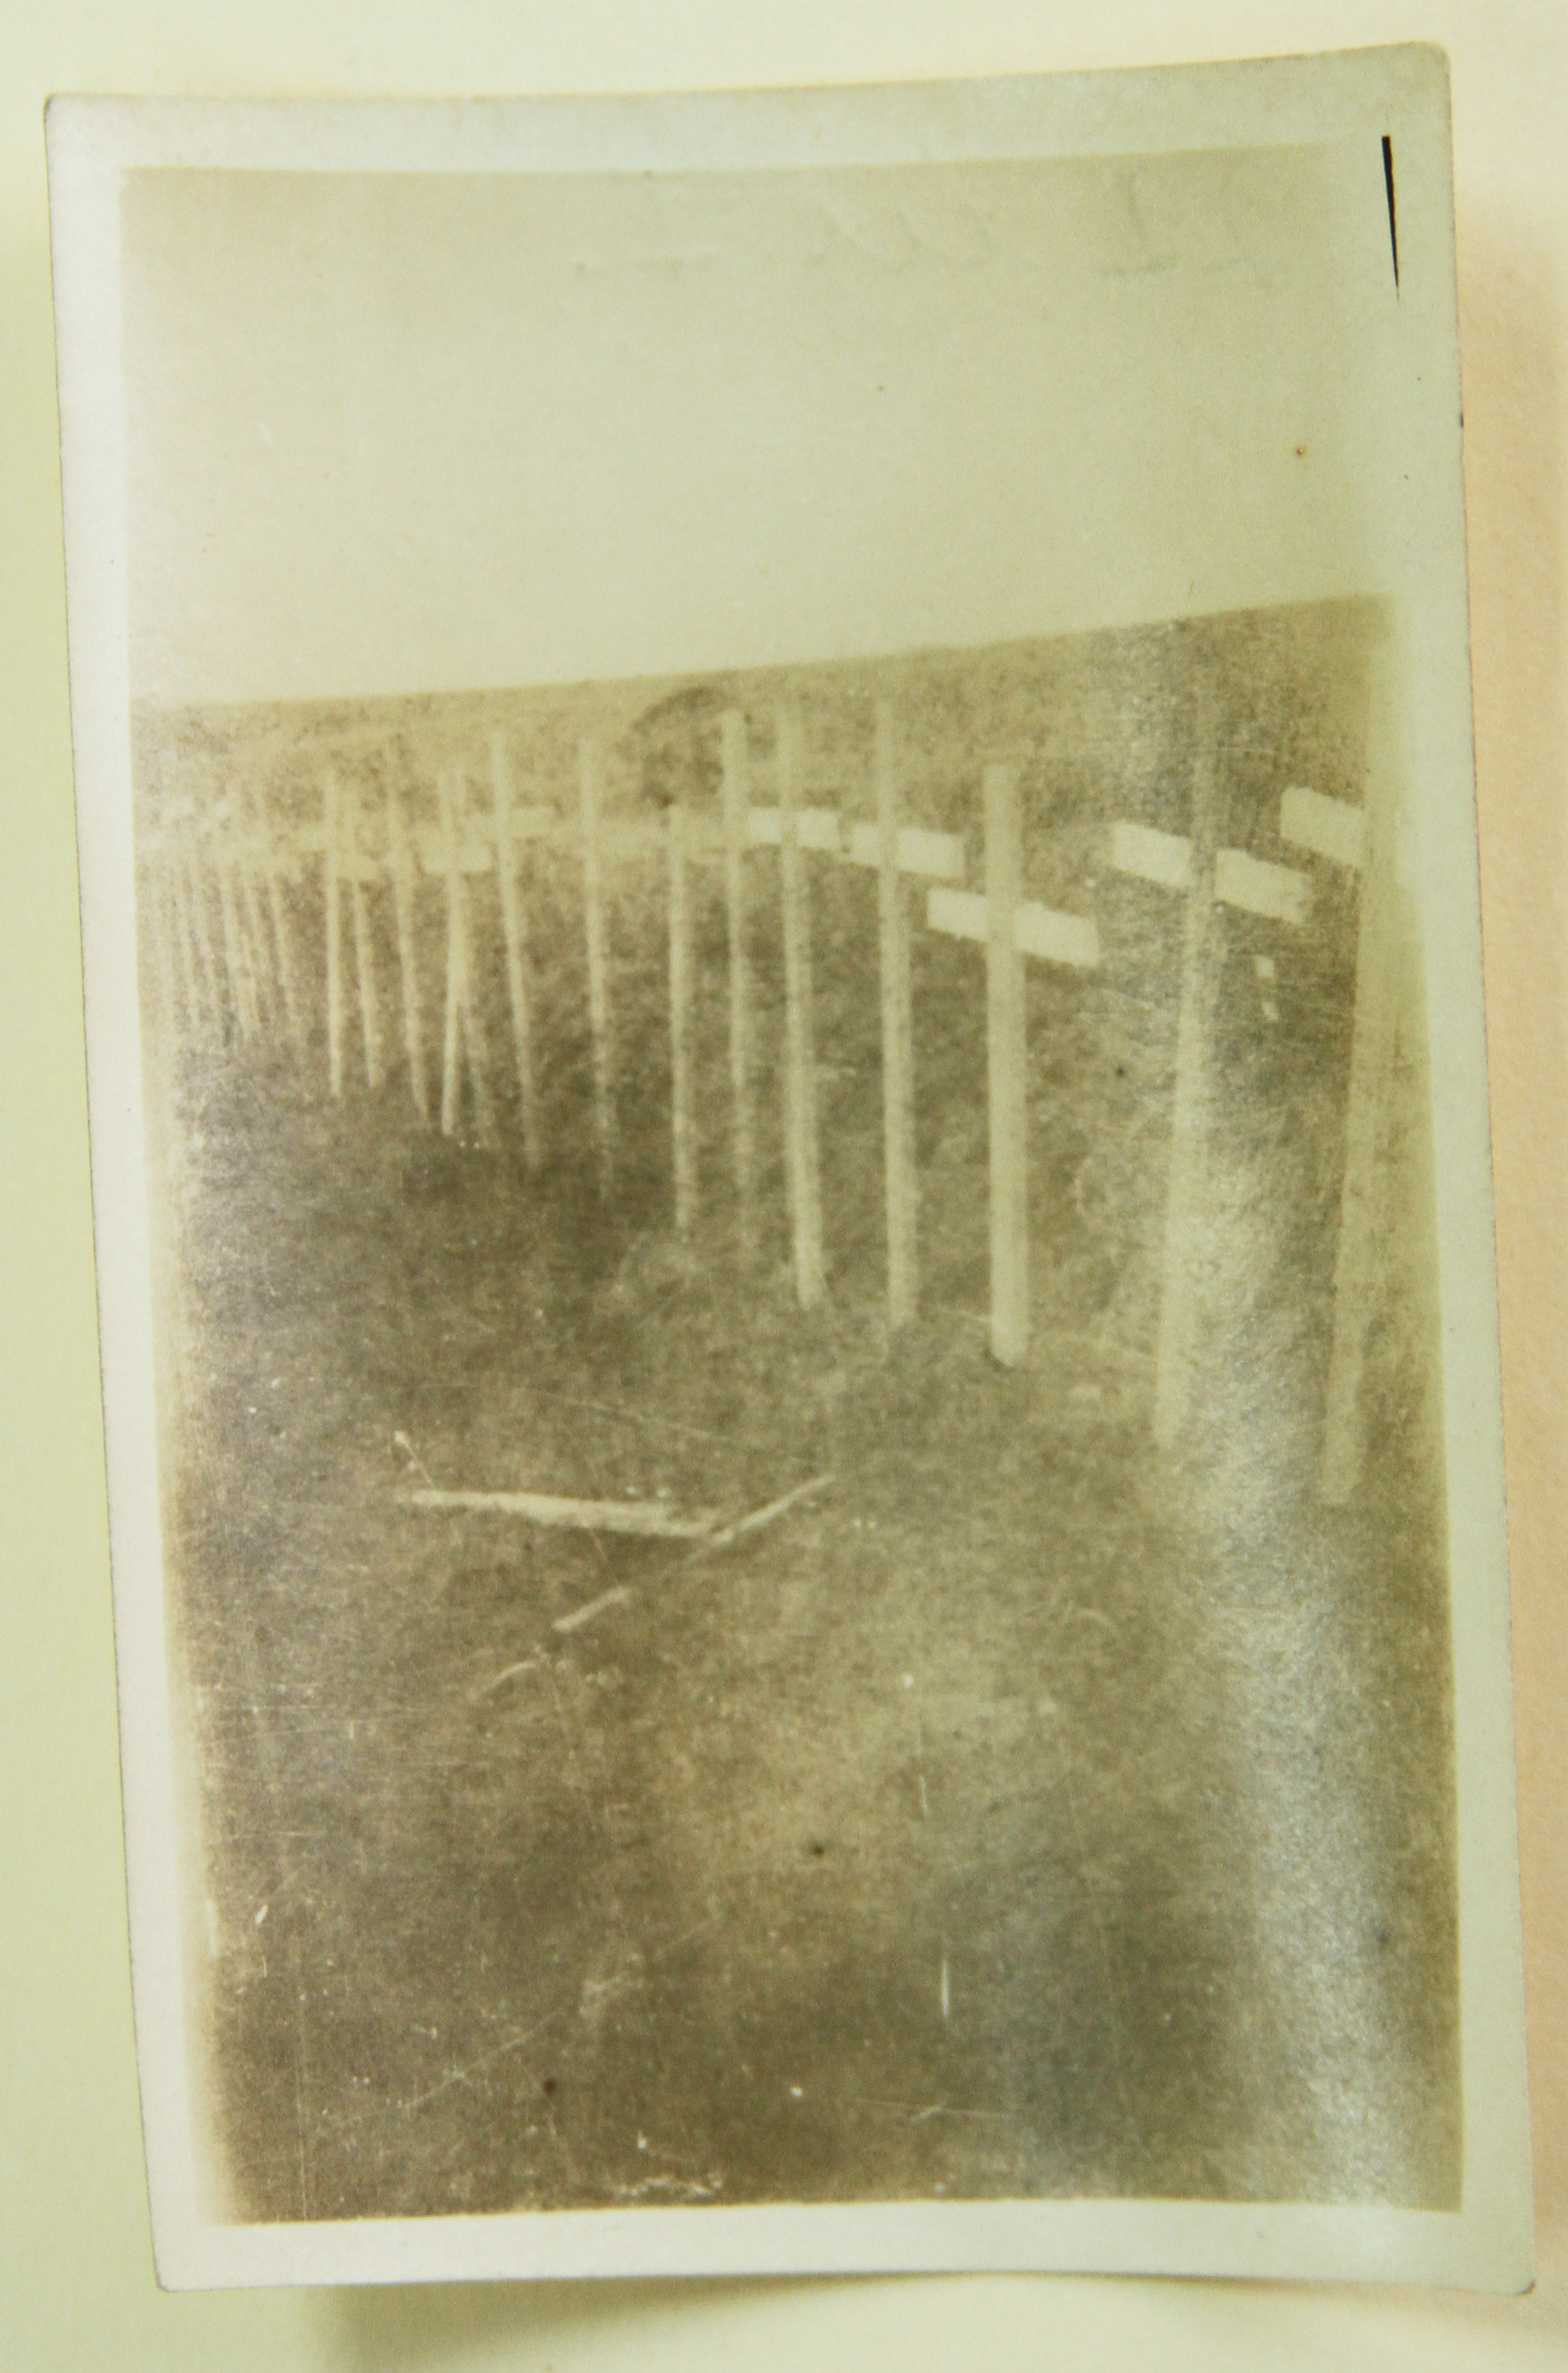 Graves in France II, Earl L. Stahl Collection, Courtesy of Craig Bowers.